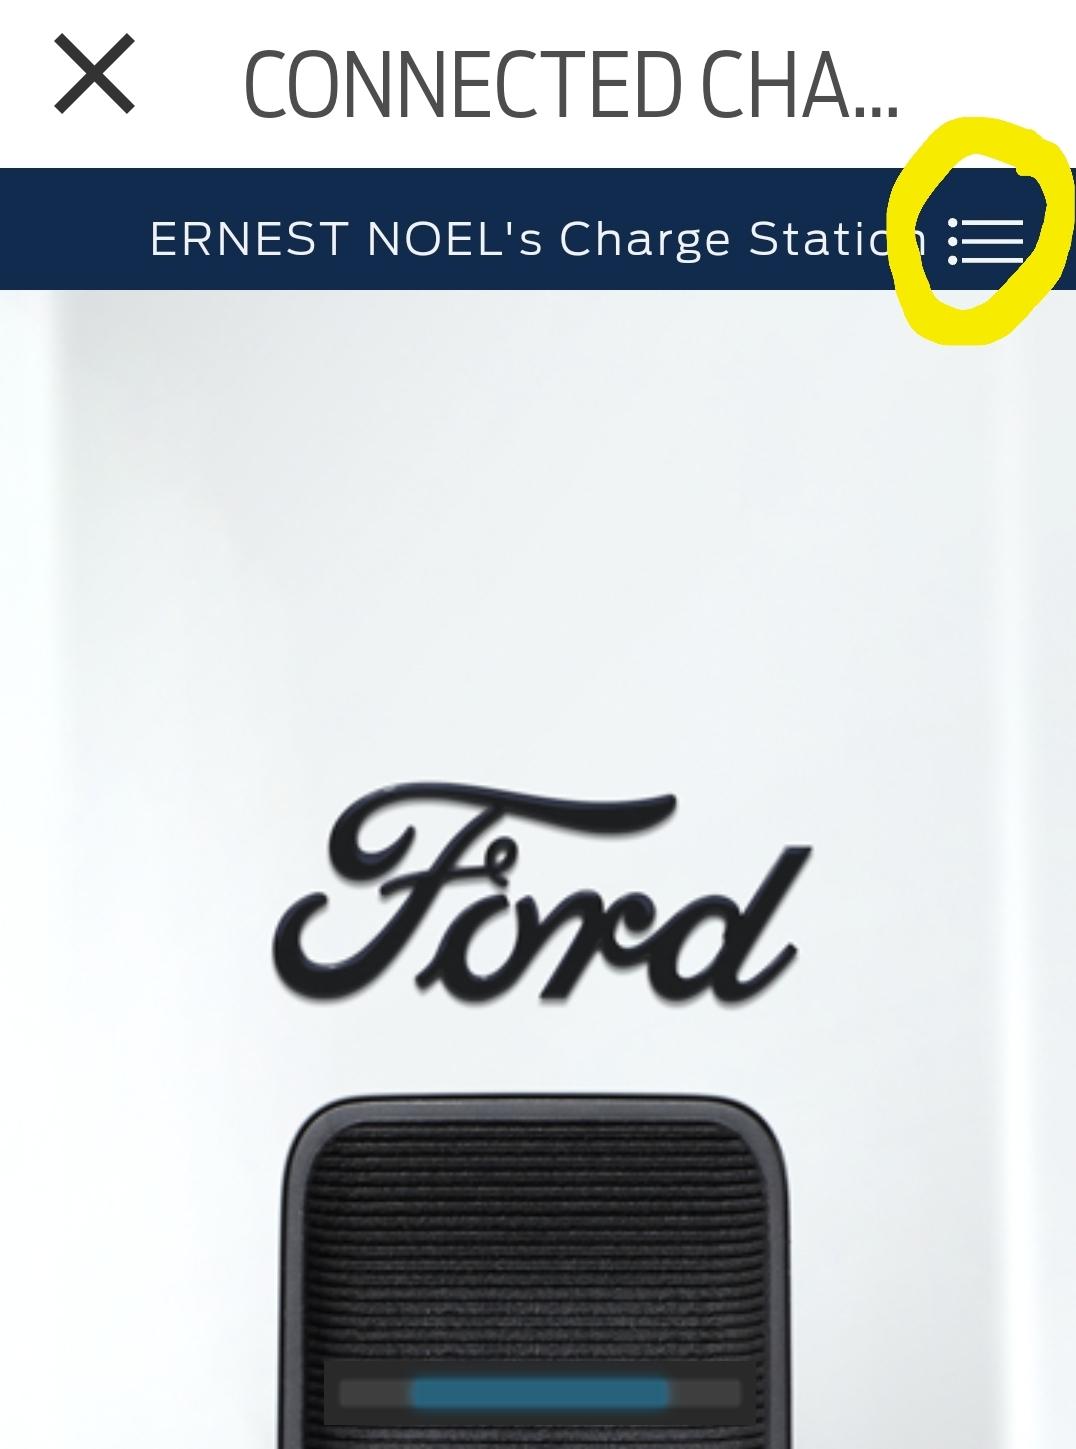 ford-connected-charge-station